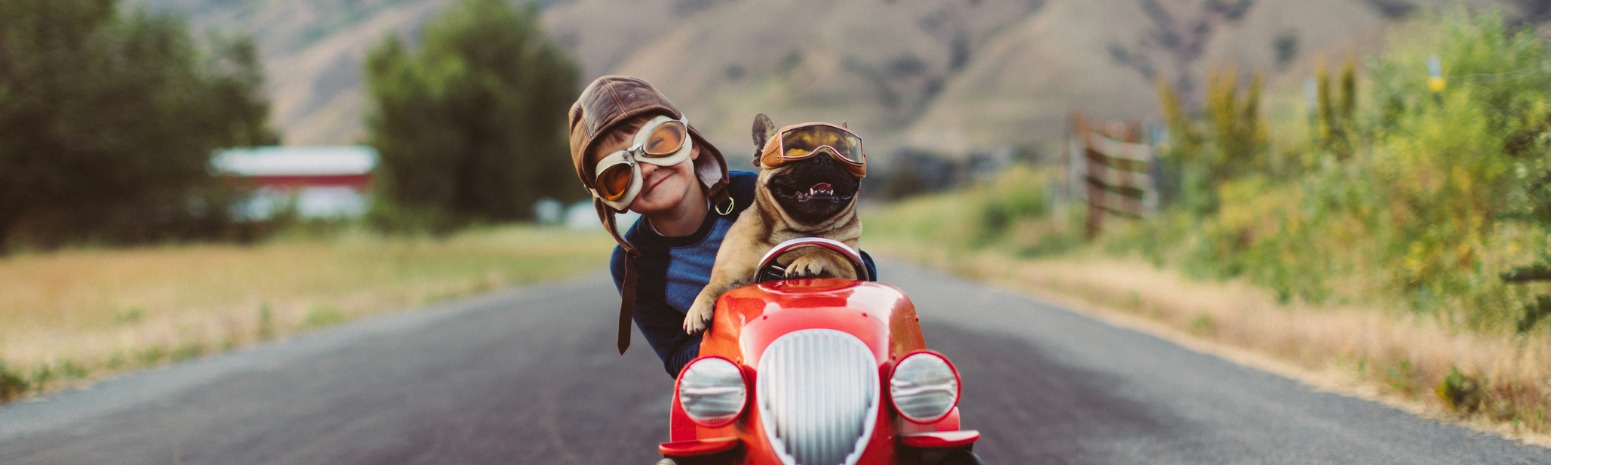 Boy with aviator goggles and dog in a toy car